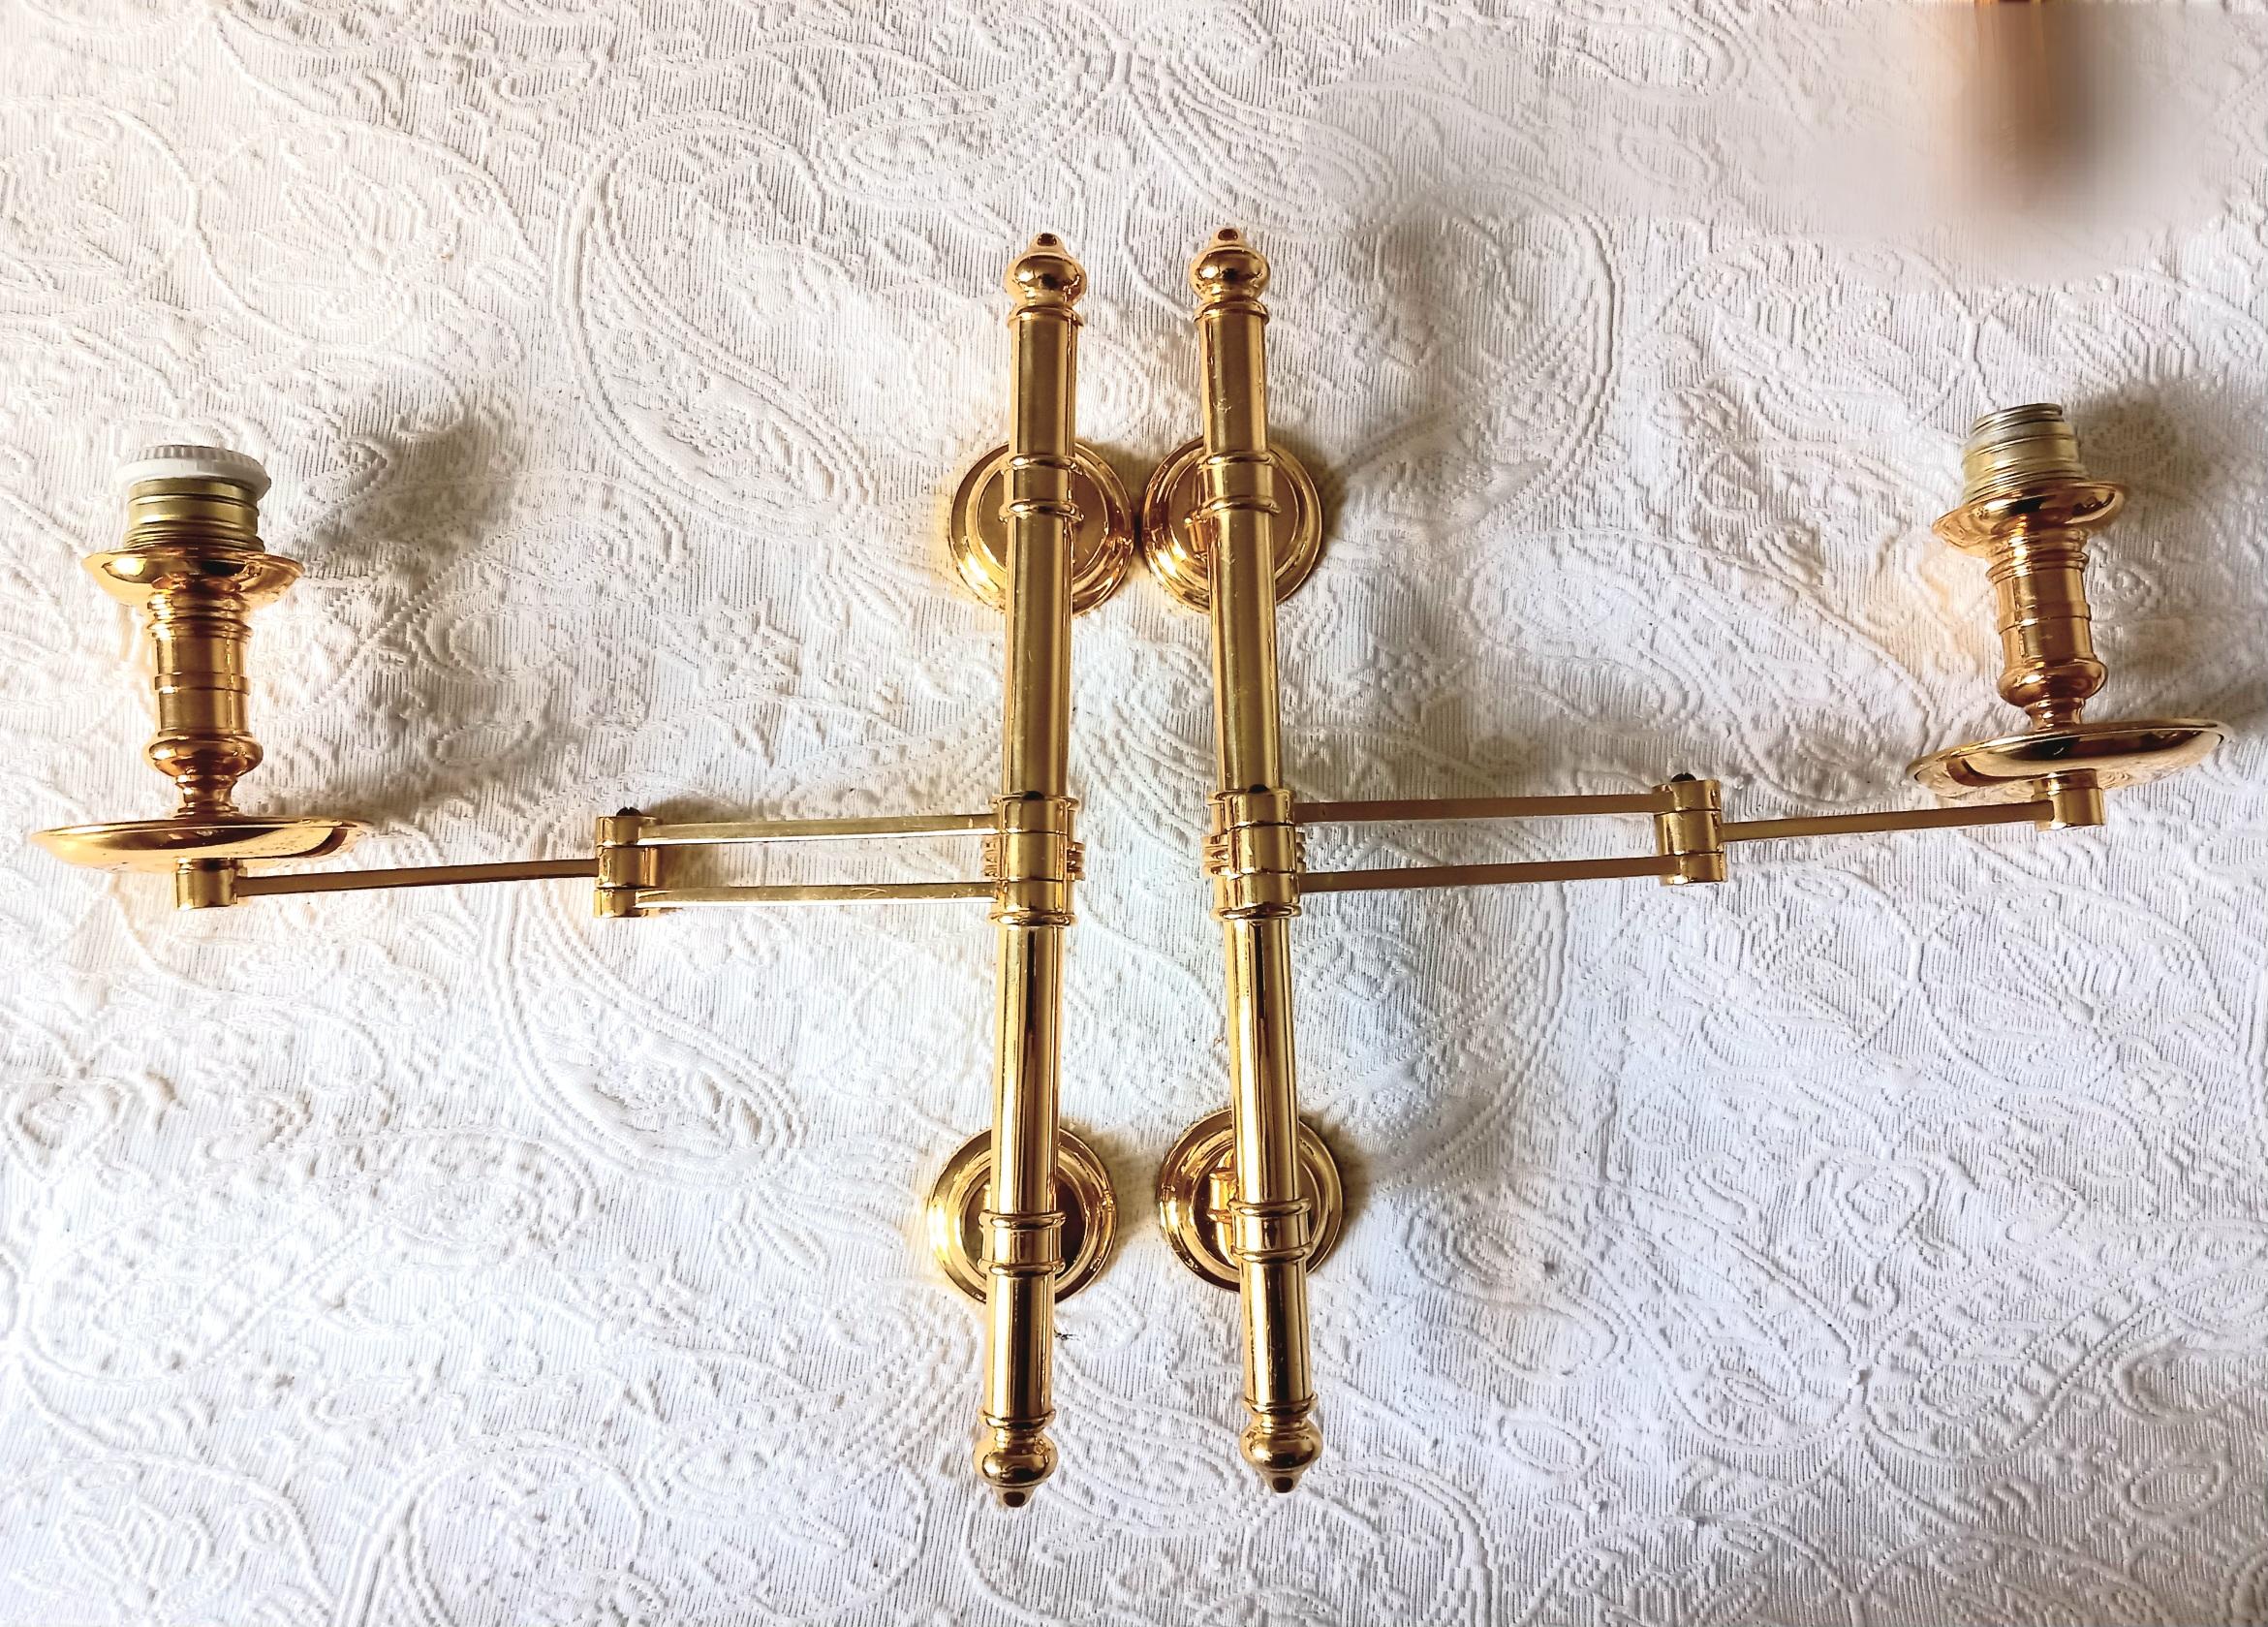  Pair of French Mison Jansen Swing Arm Sconces In Excellent Condition For Sale In Mombuey, Zamora